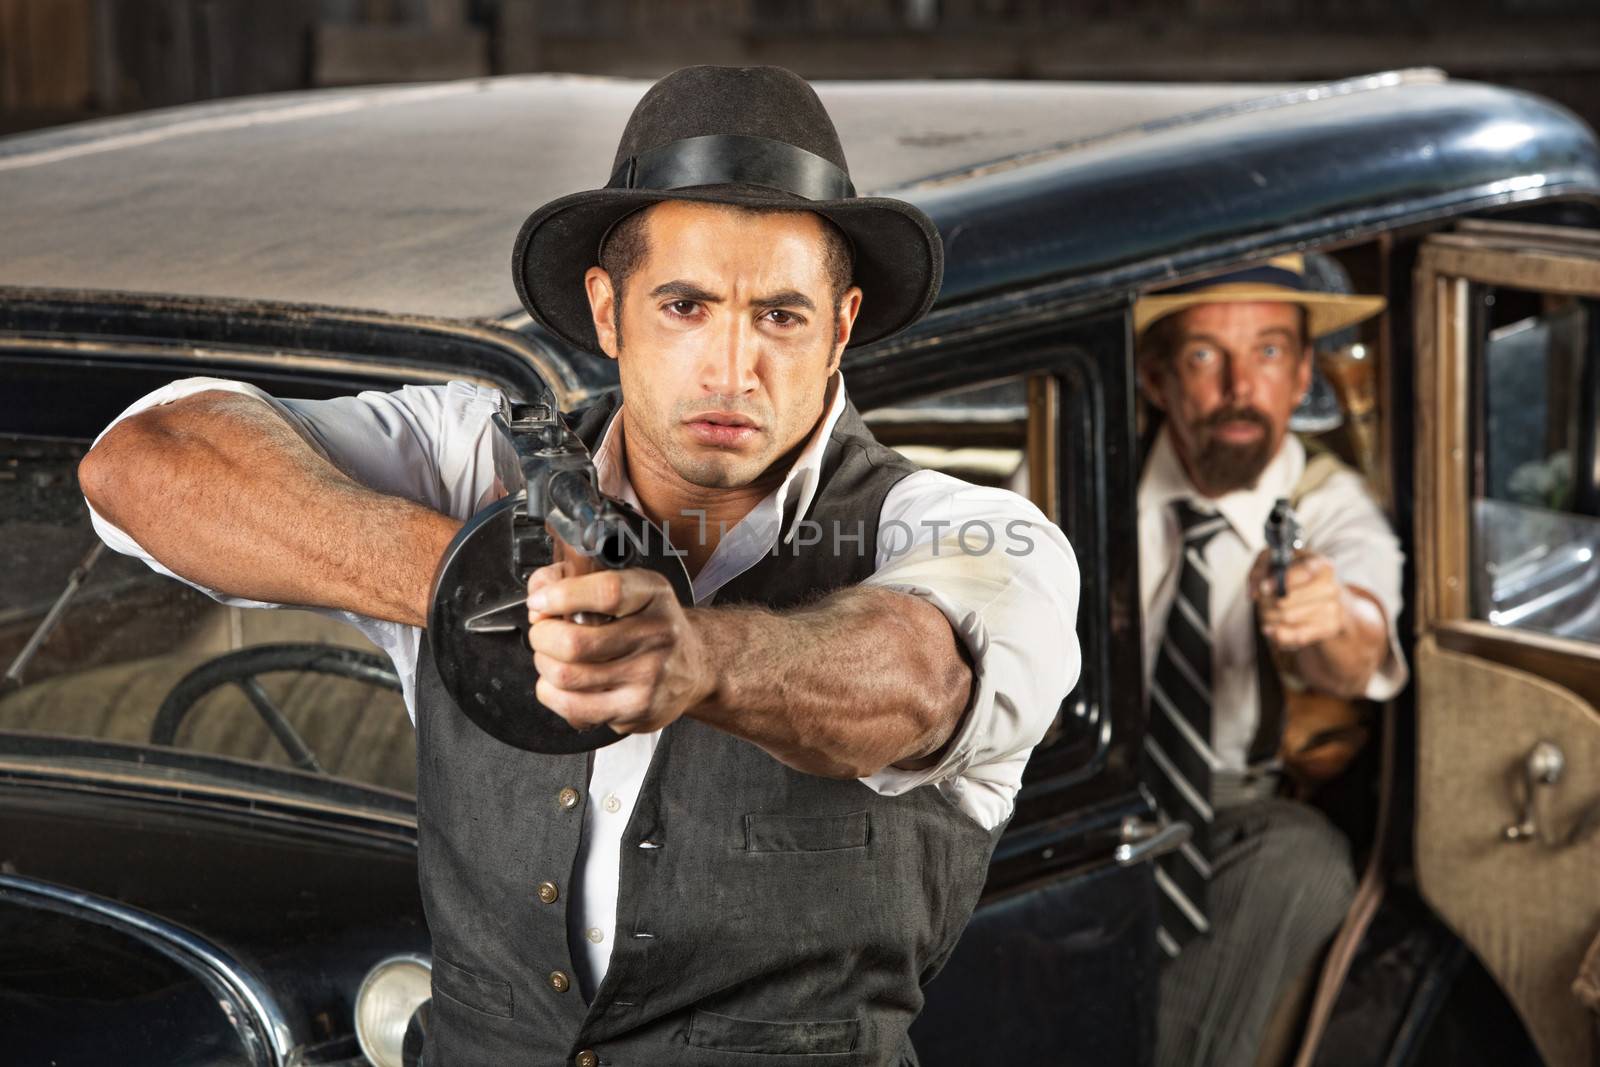 Tough 1920s vintage gangsters by car with weapons